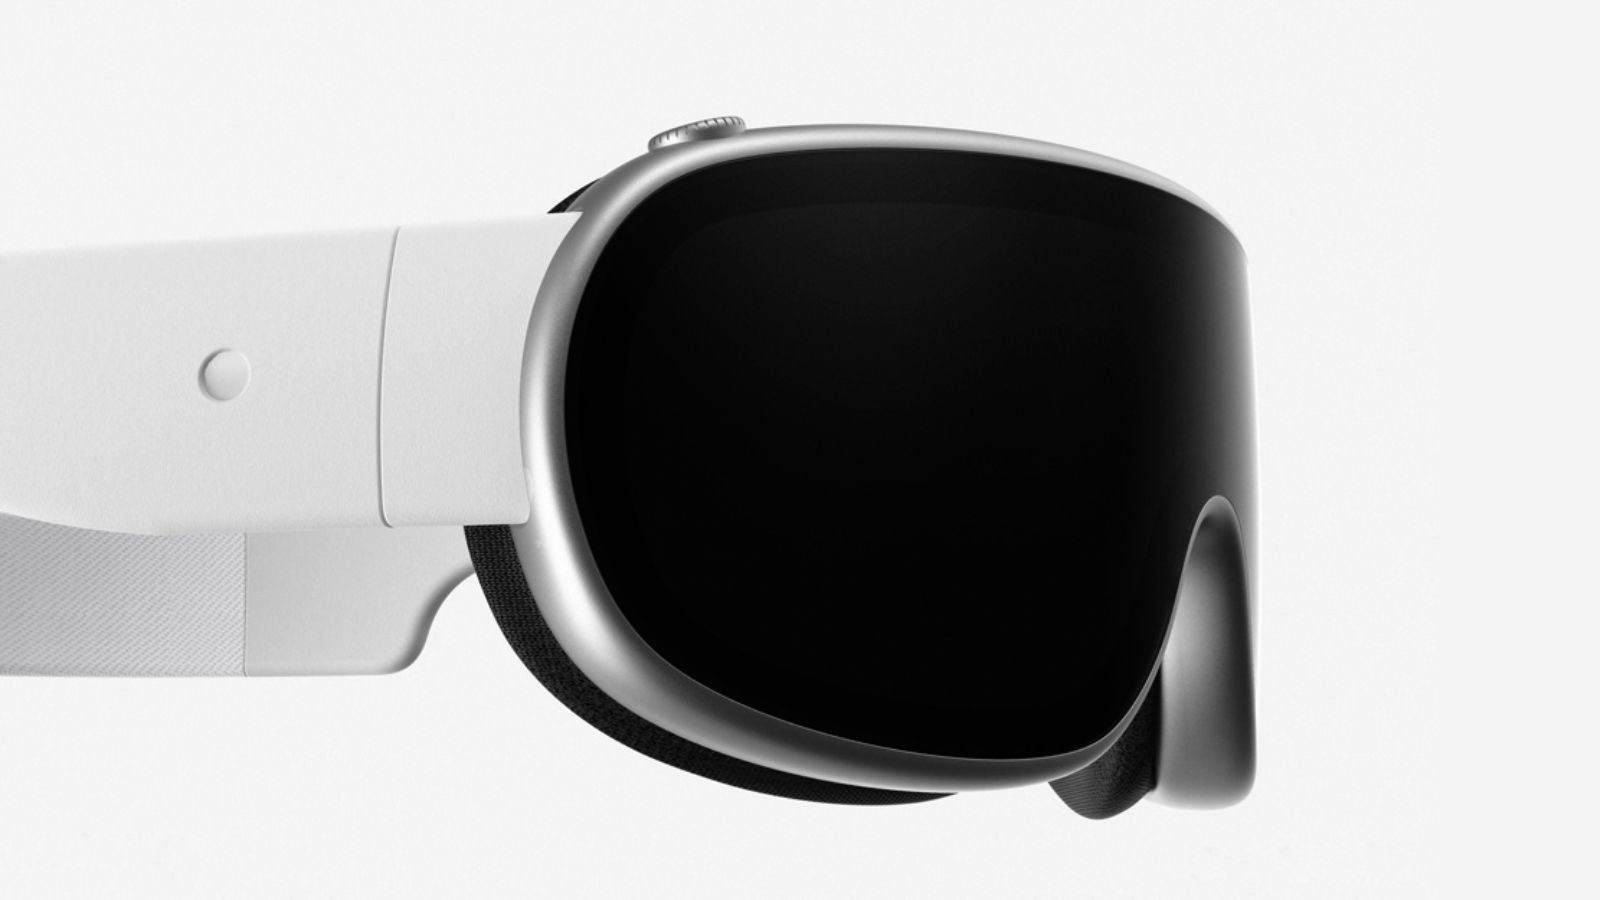 apple mixed reality headset concept by david lewis and marcus kane.jpg